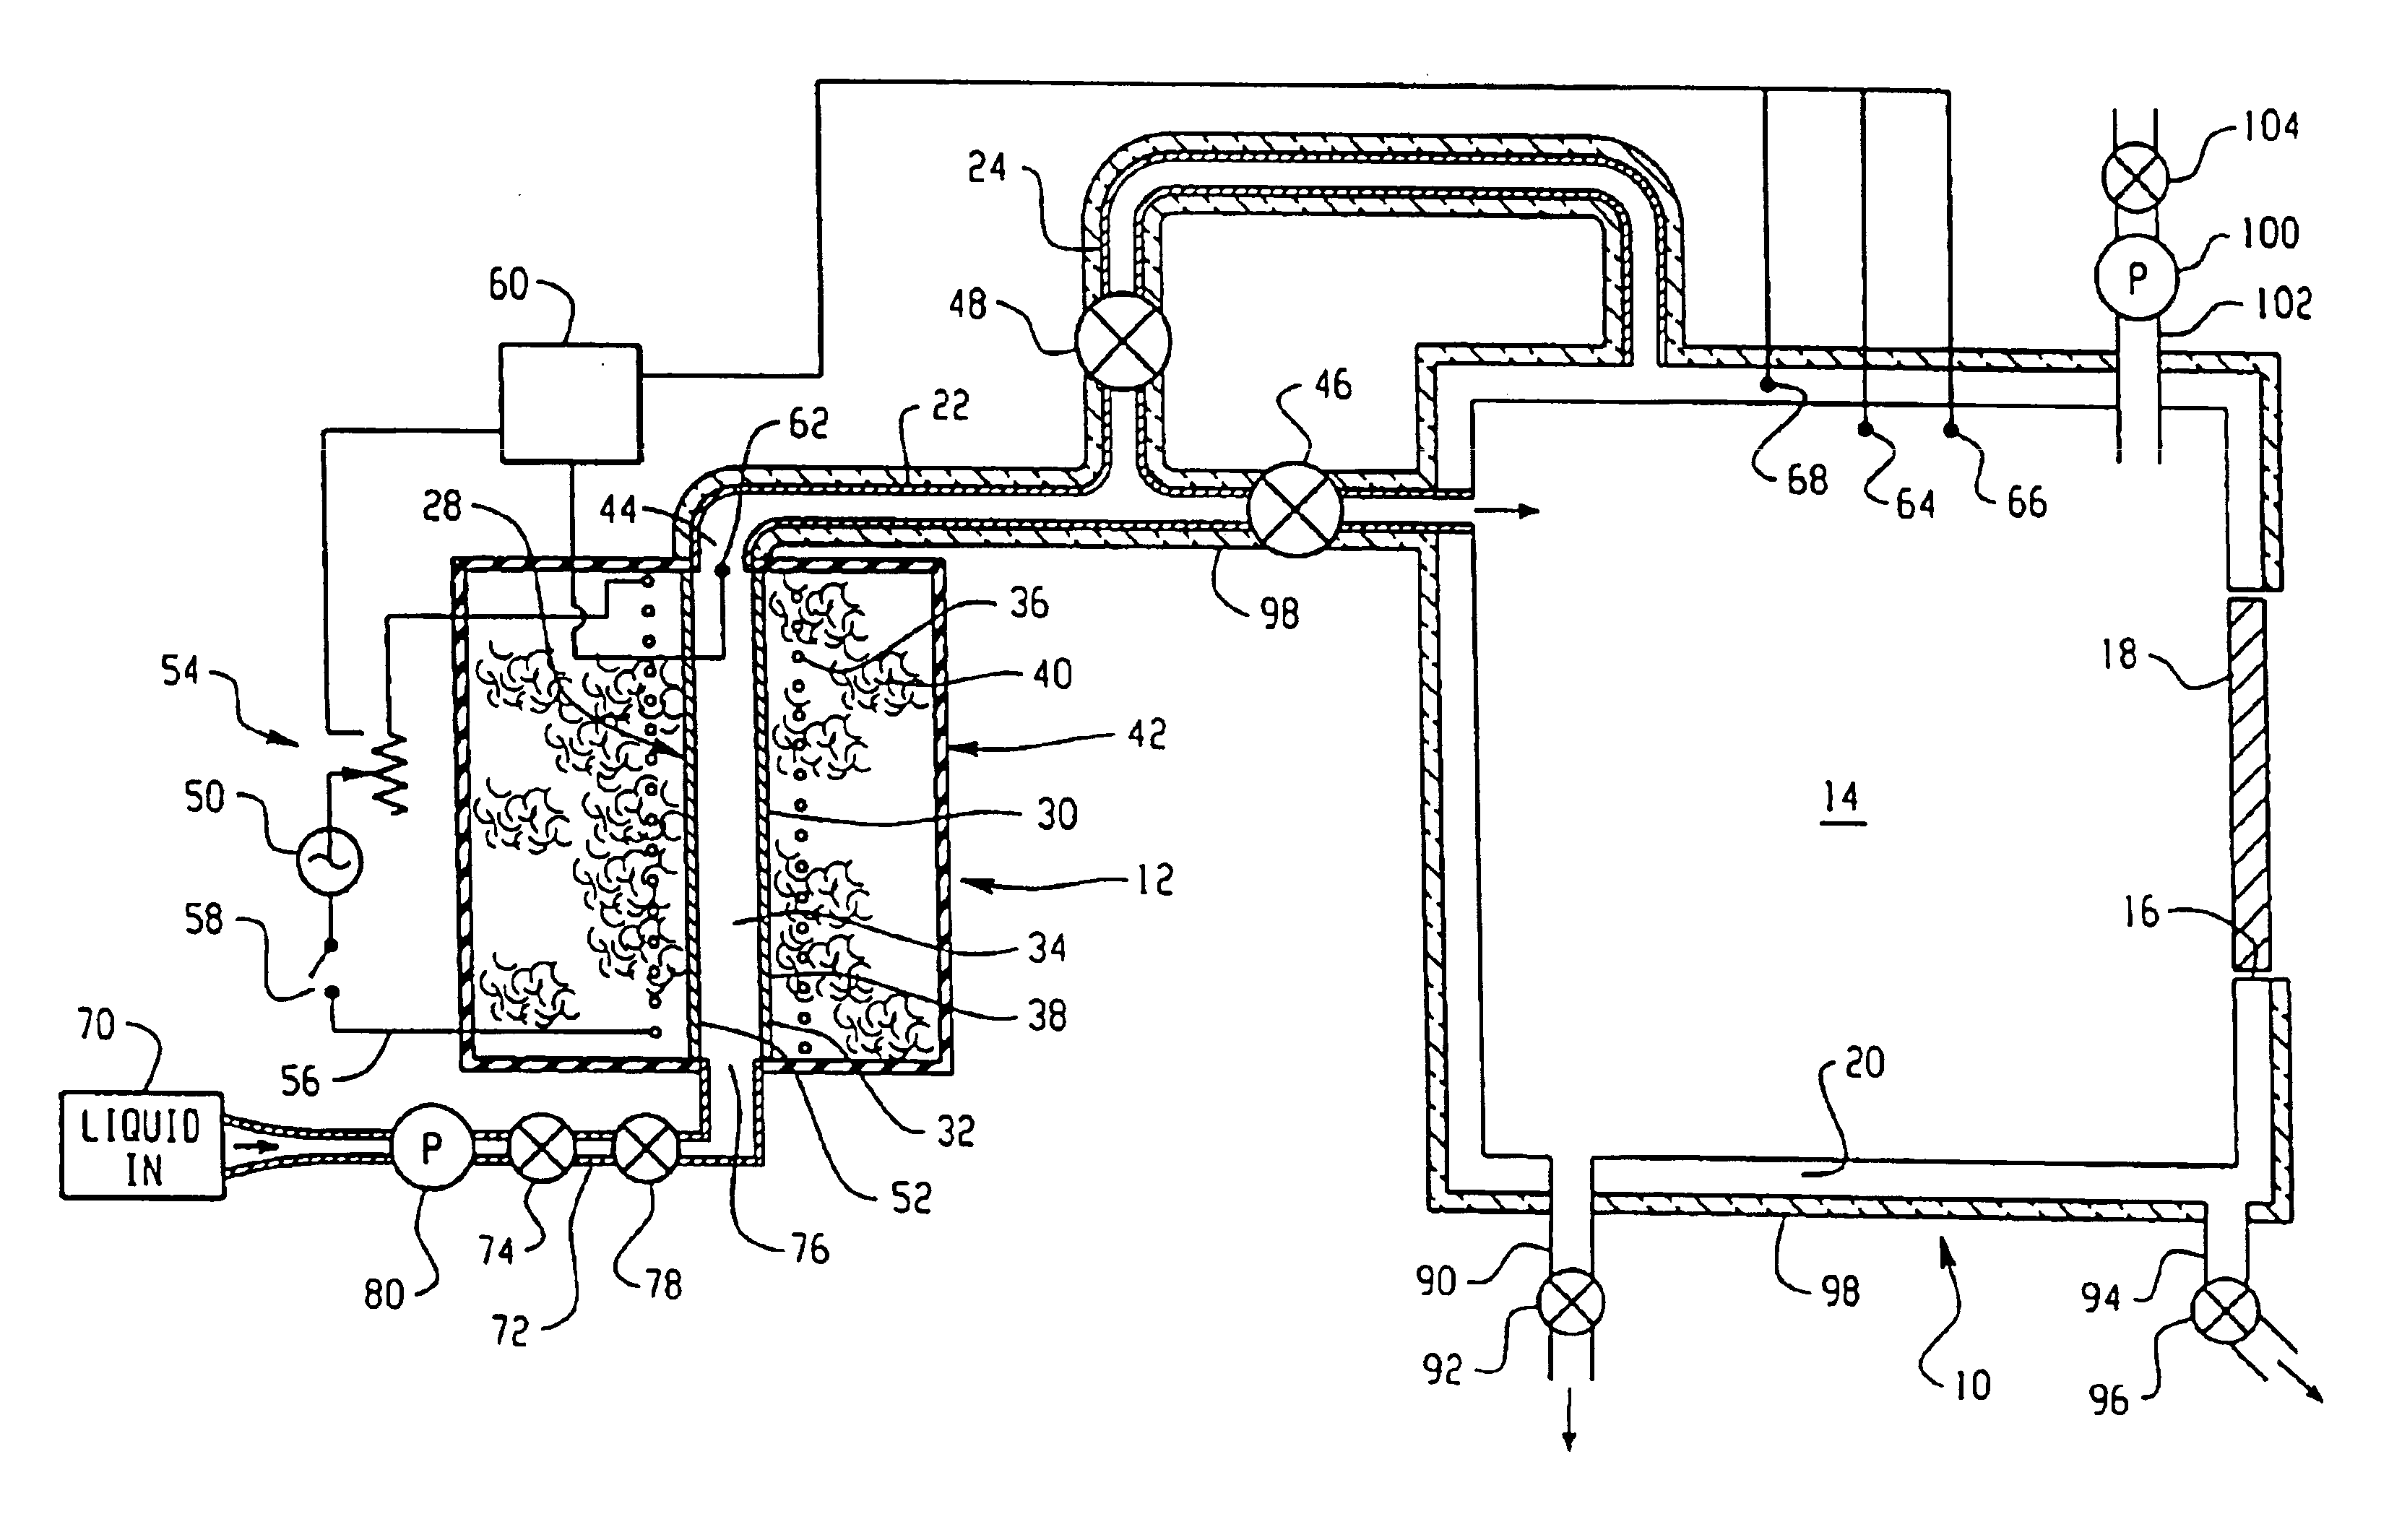 Electromagnetically responsive heating apparatus for vaporizer